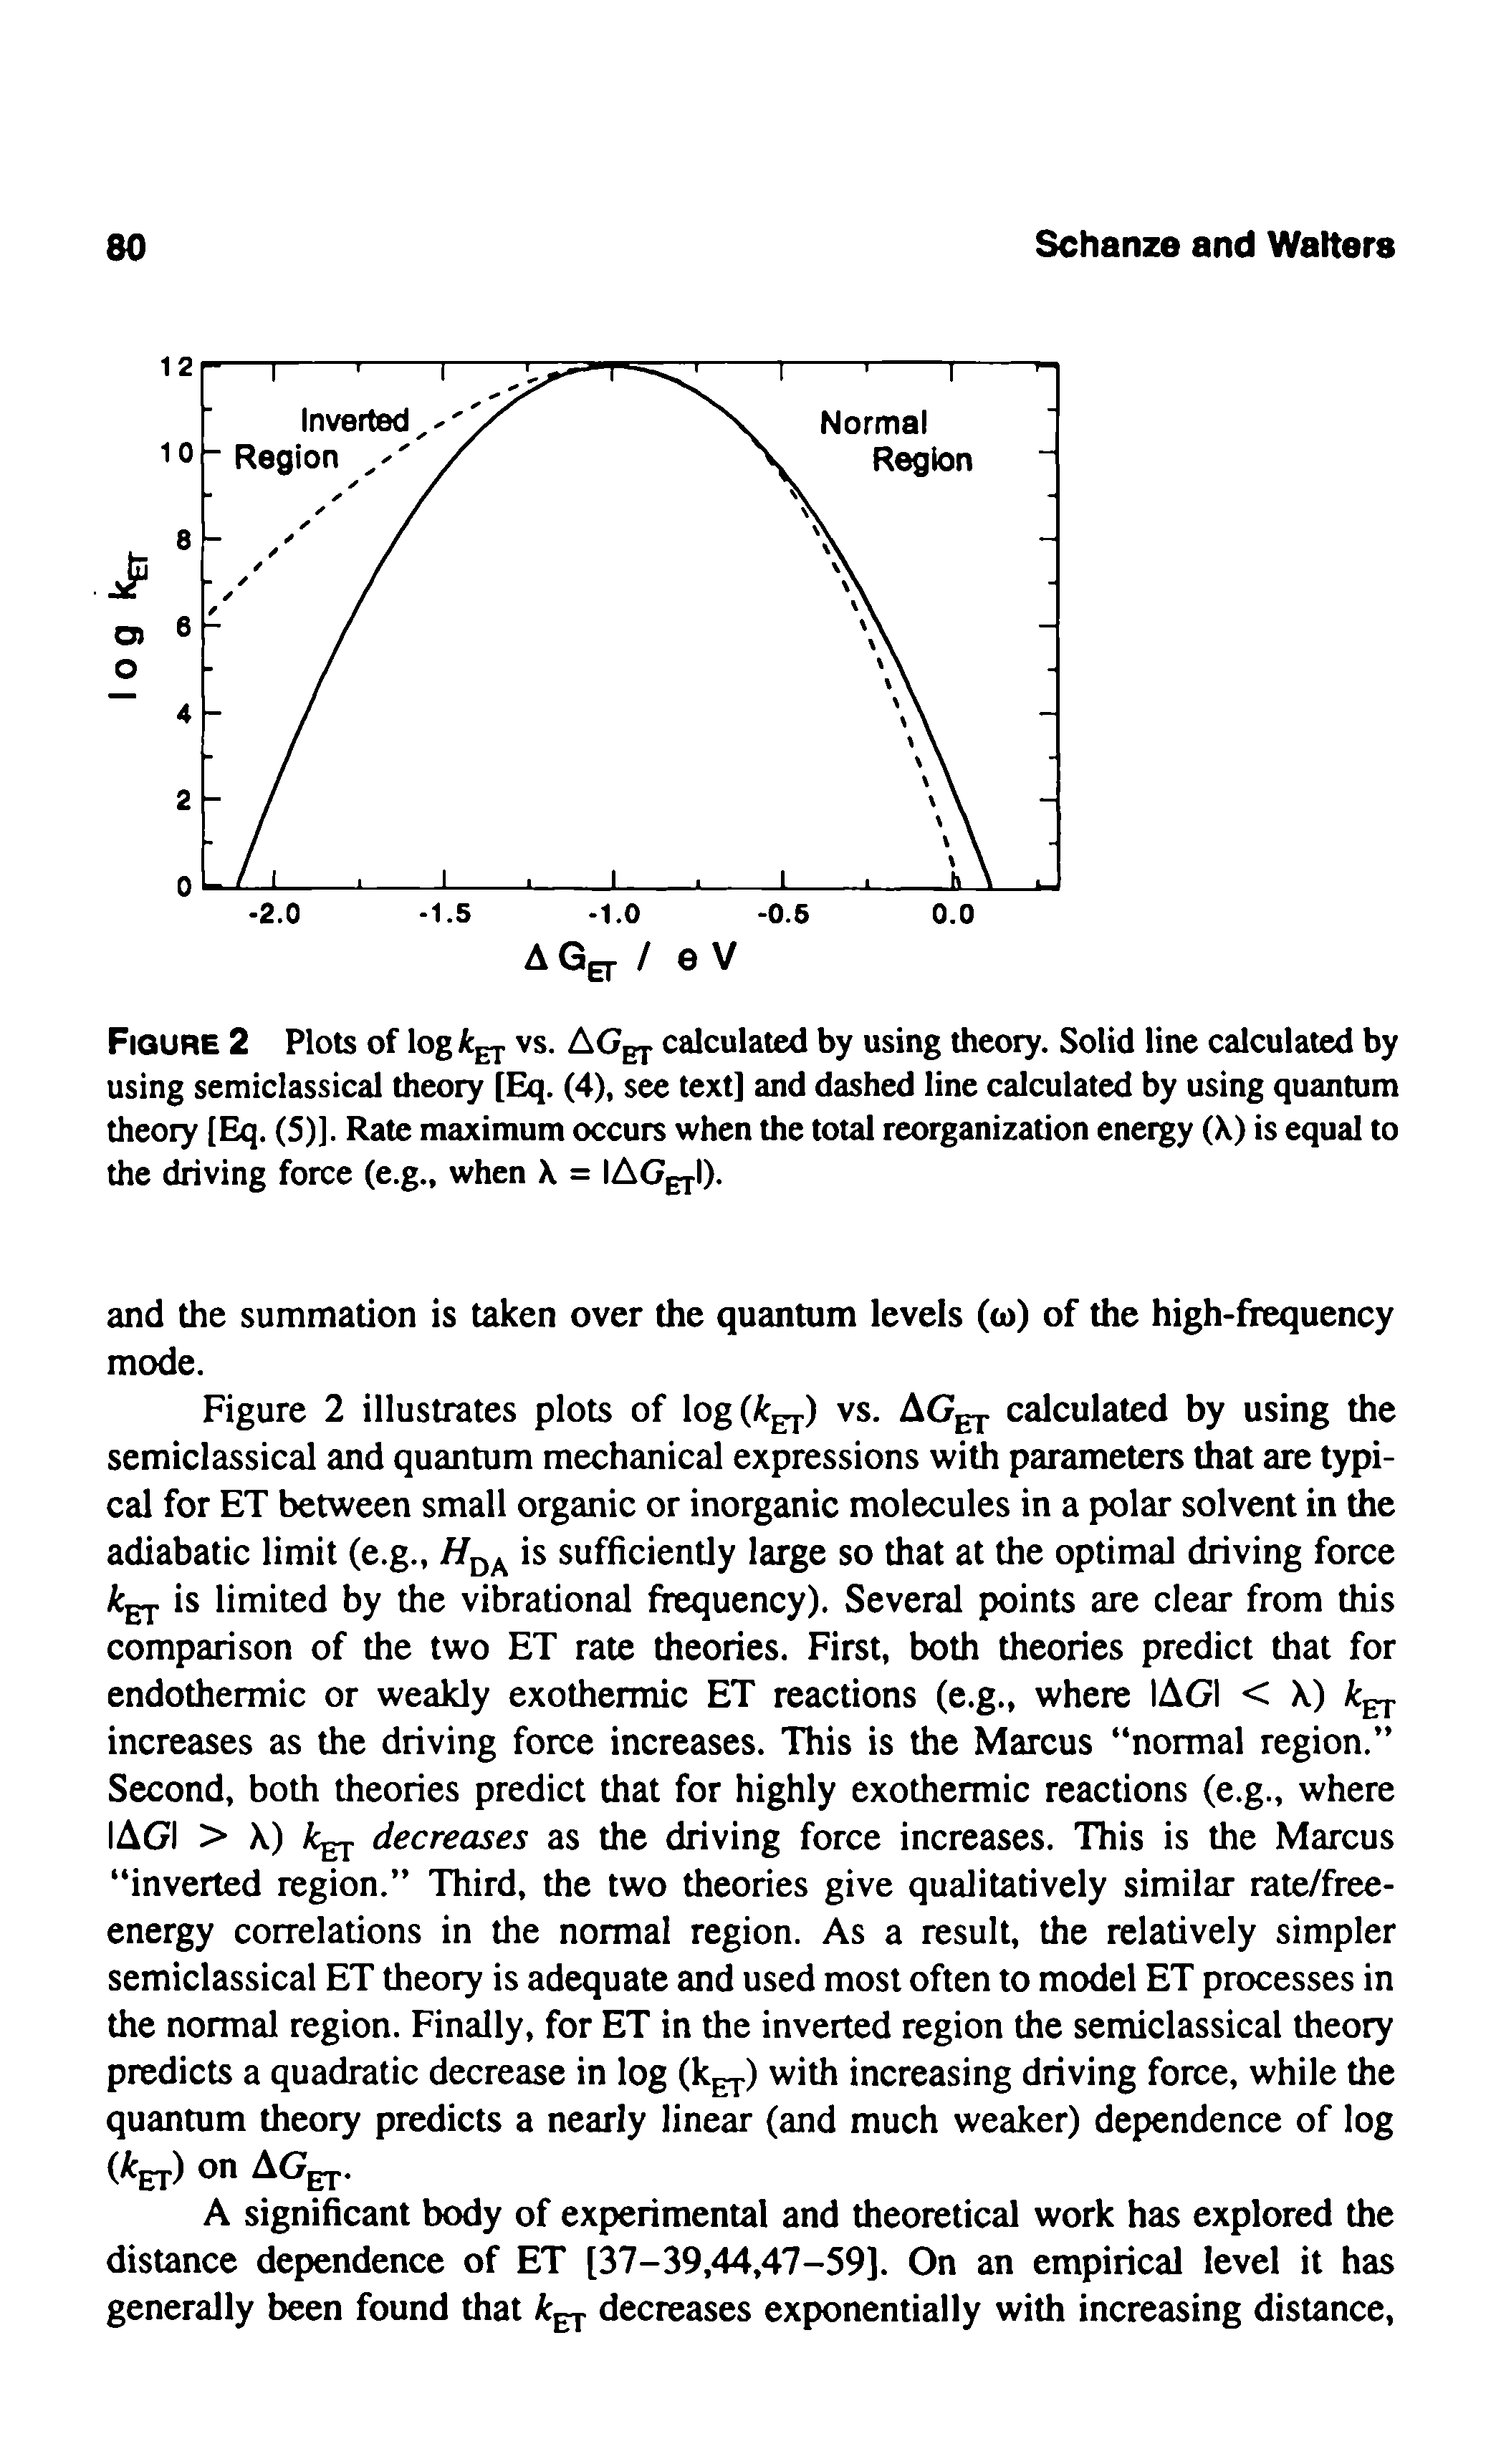 Figure 2 Plots of log vs. AGg-j- calculated by using theory. Solid line calculated by using semiclassical theory [Eq. (4), see text] and dashed line calculated by using quantum theory [Eq. (5)]. Rate maximum occurs when the total reorganization energy (X) is equal to the driving force (e.g., when X = IAGCTI).